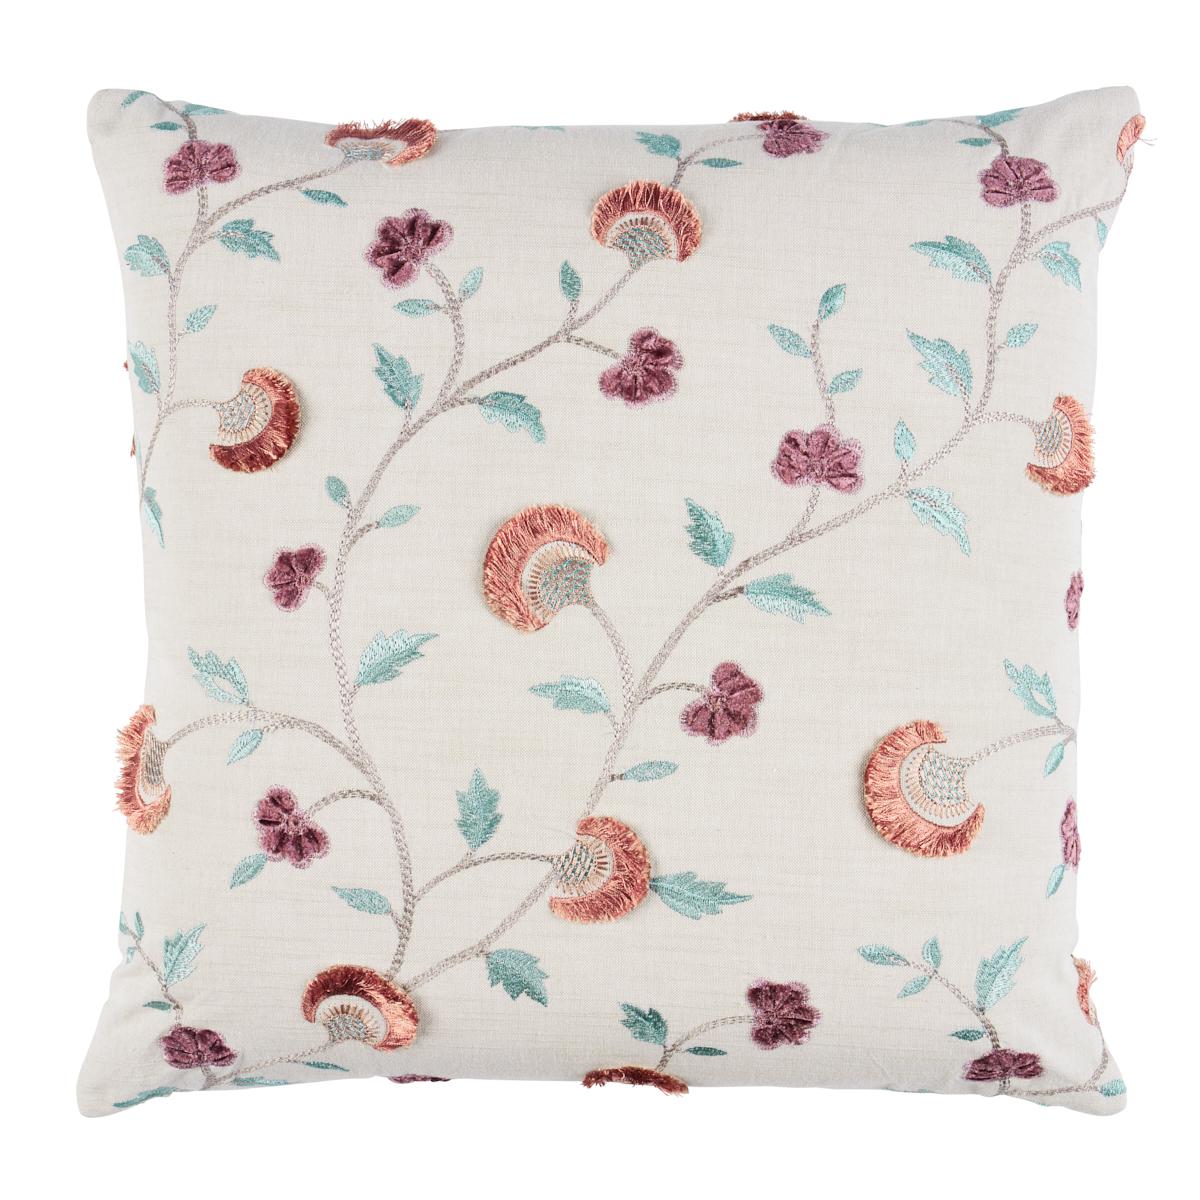 Iyla Embroidery Pillow_ROSE & NATURAL